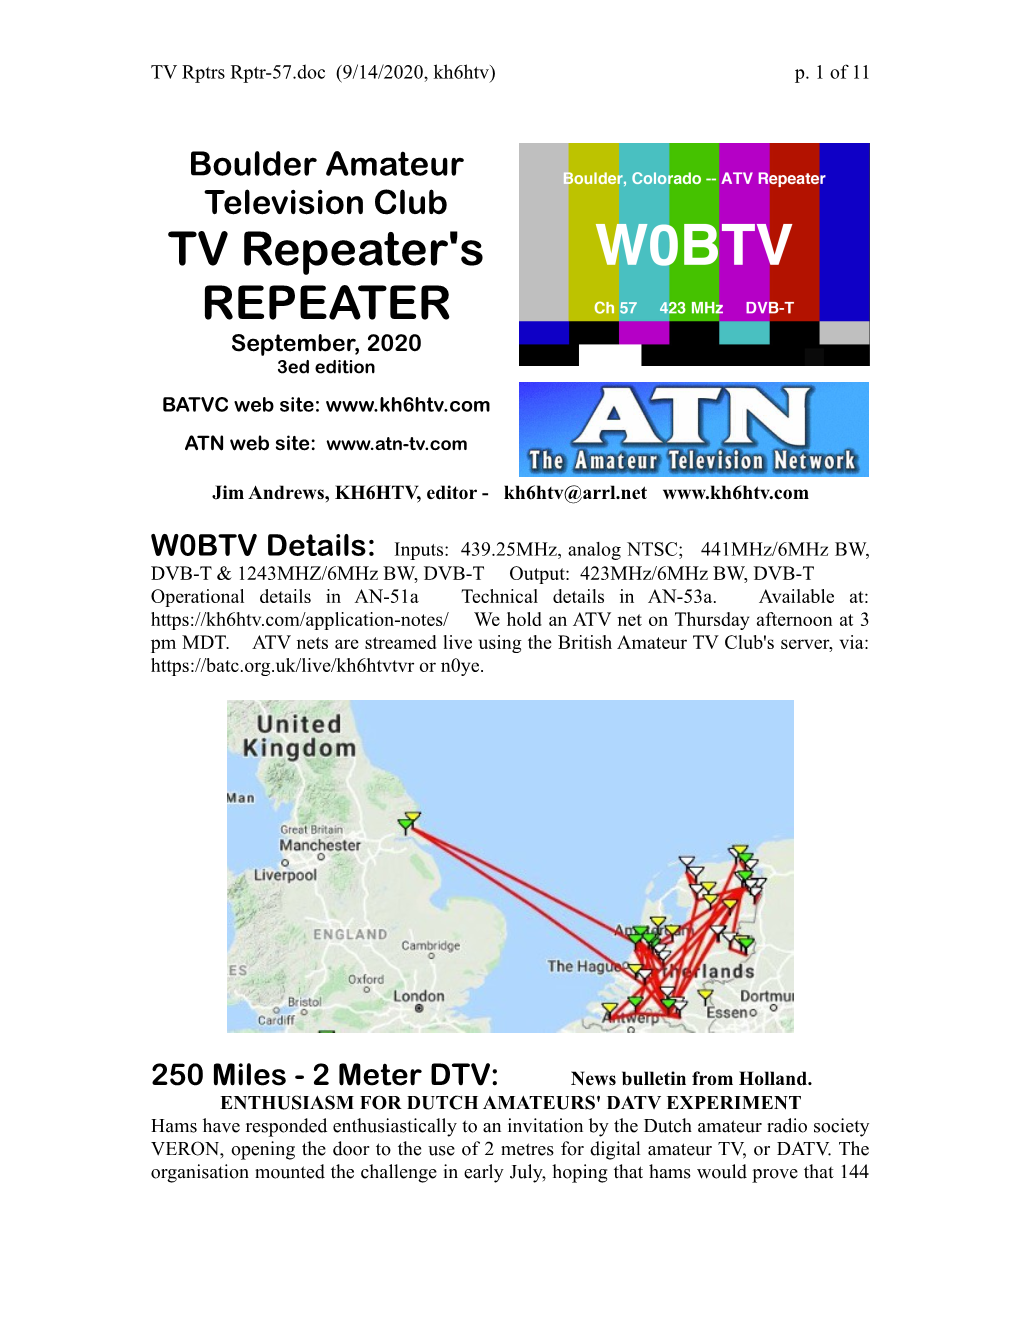 Boulder Amateur Television Club TV Repeater's REPEATER September, 2020 3Ed Edition BATVC Web Site